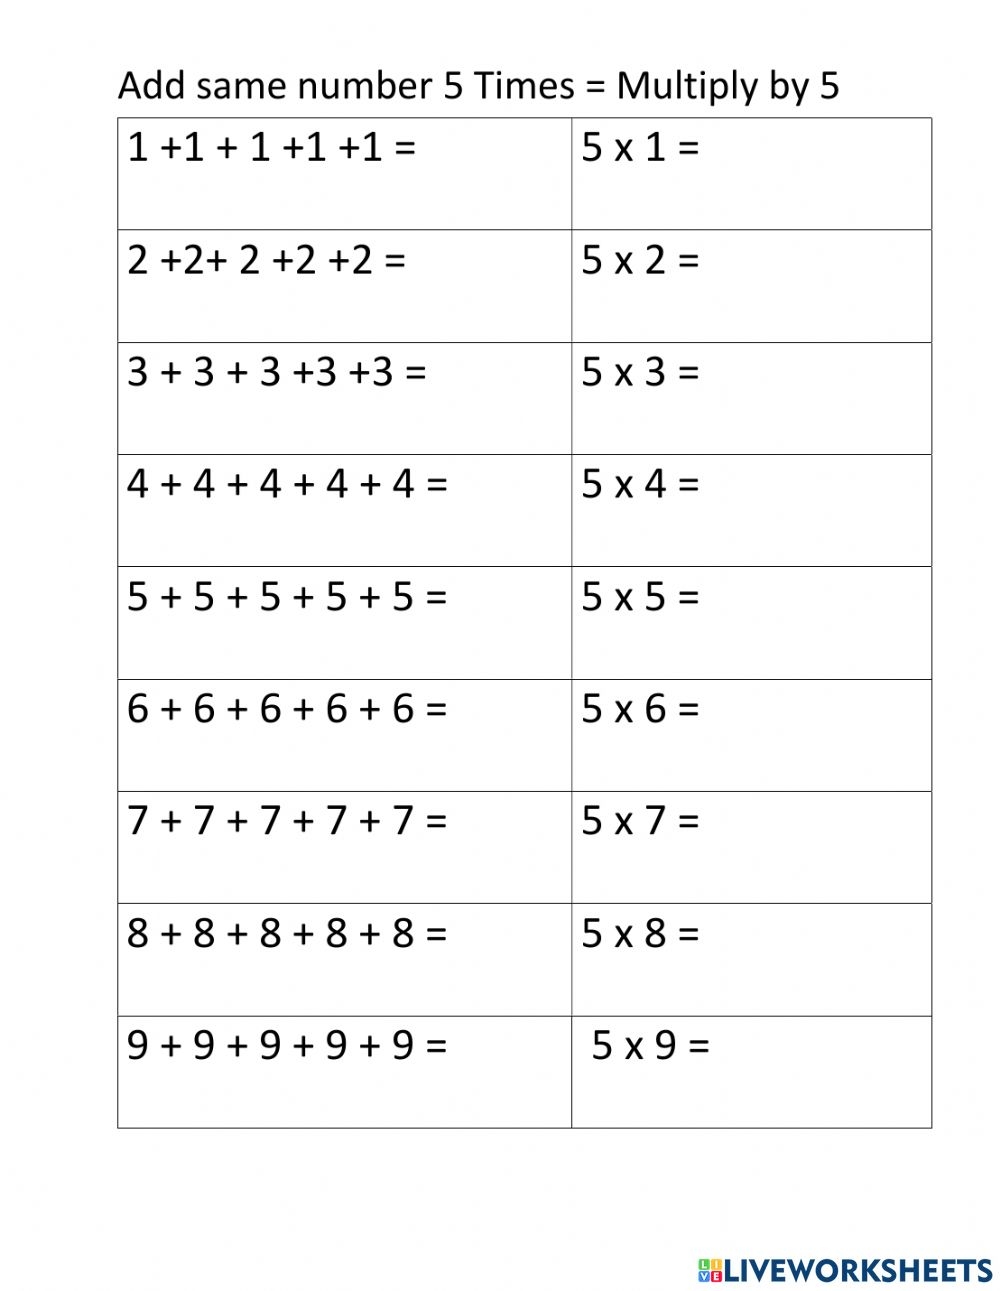 Add By Same Number 5 Times Multiply By 5 Worksheet